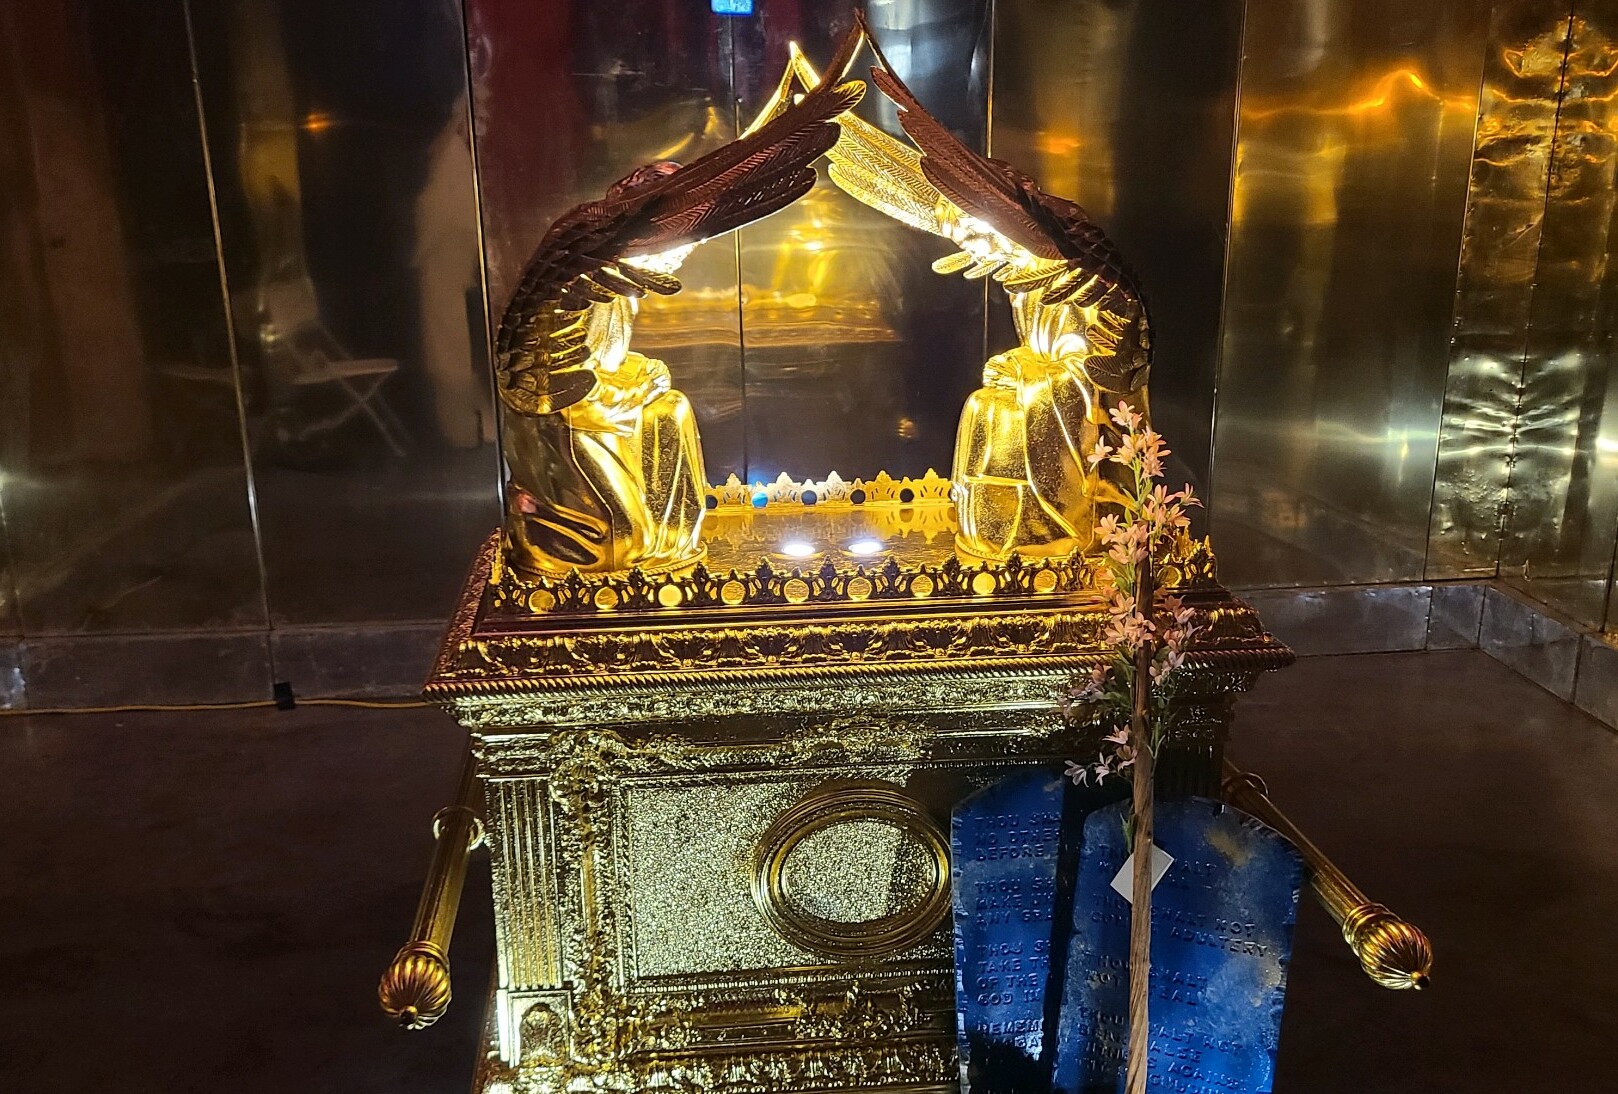 Holy of Holies
Ark of the Covenant